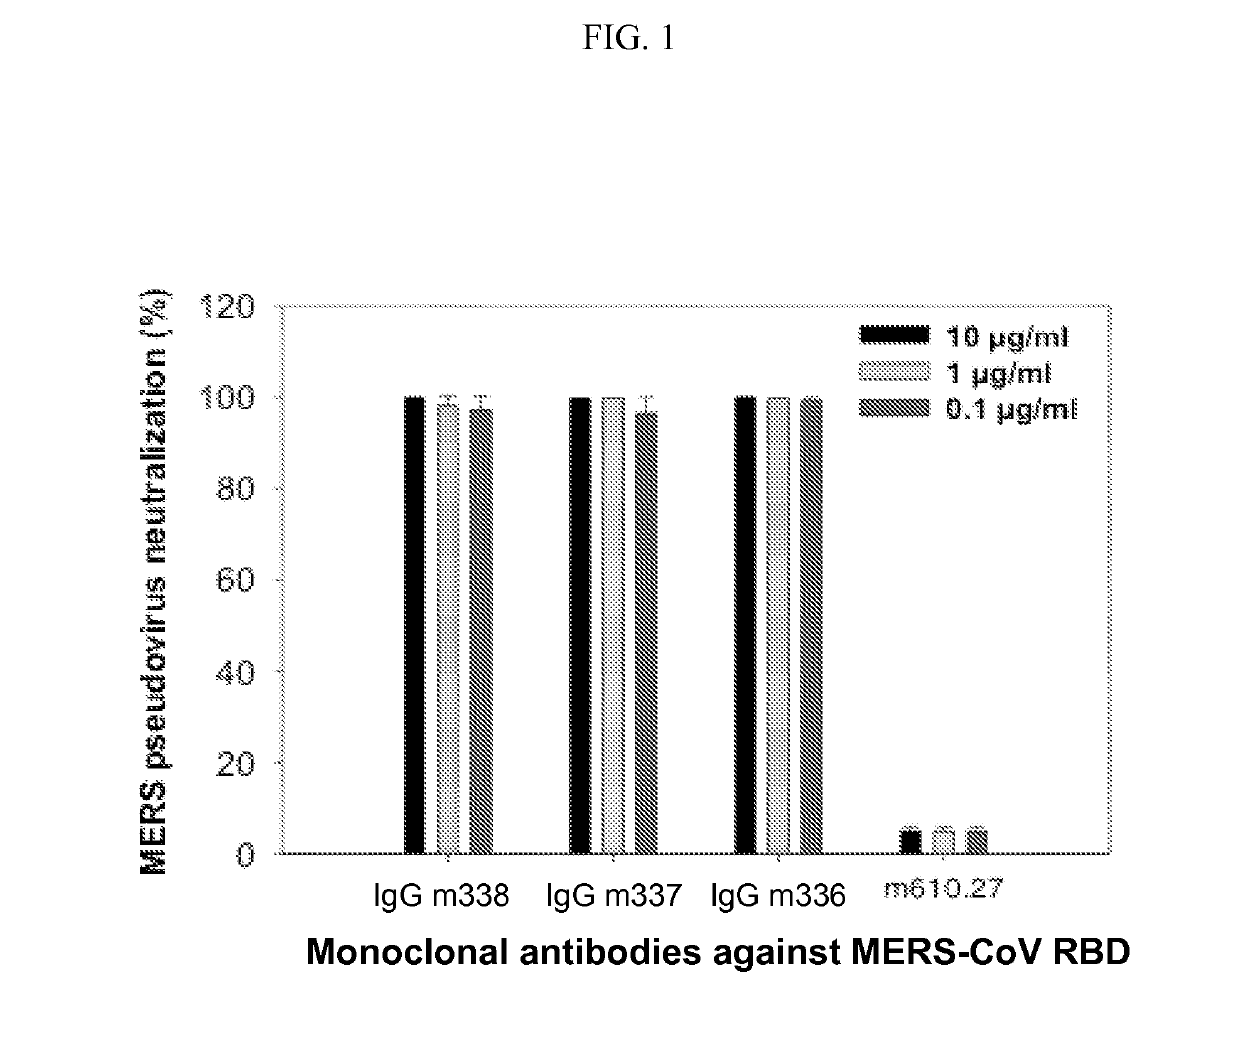 Human monoclonal antibodies against the middle east respiratory syndrome coronavirus (MERS-CoV) and engineered bispecific fusions with inhibitory peptides